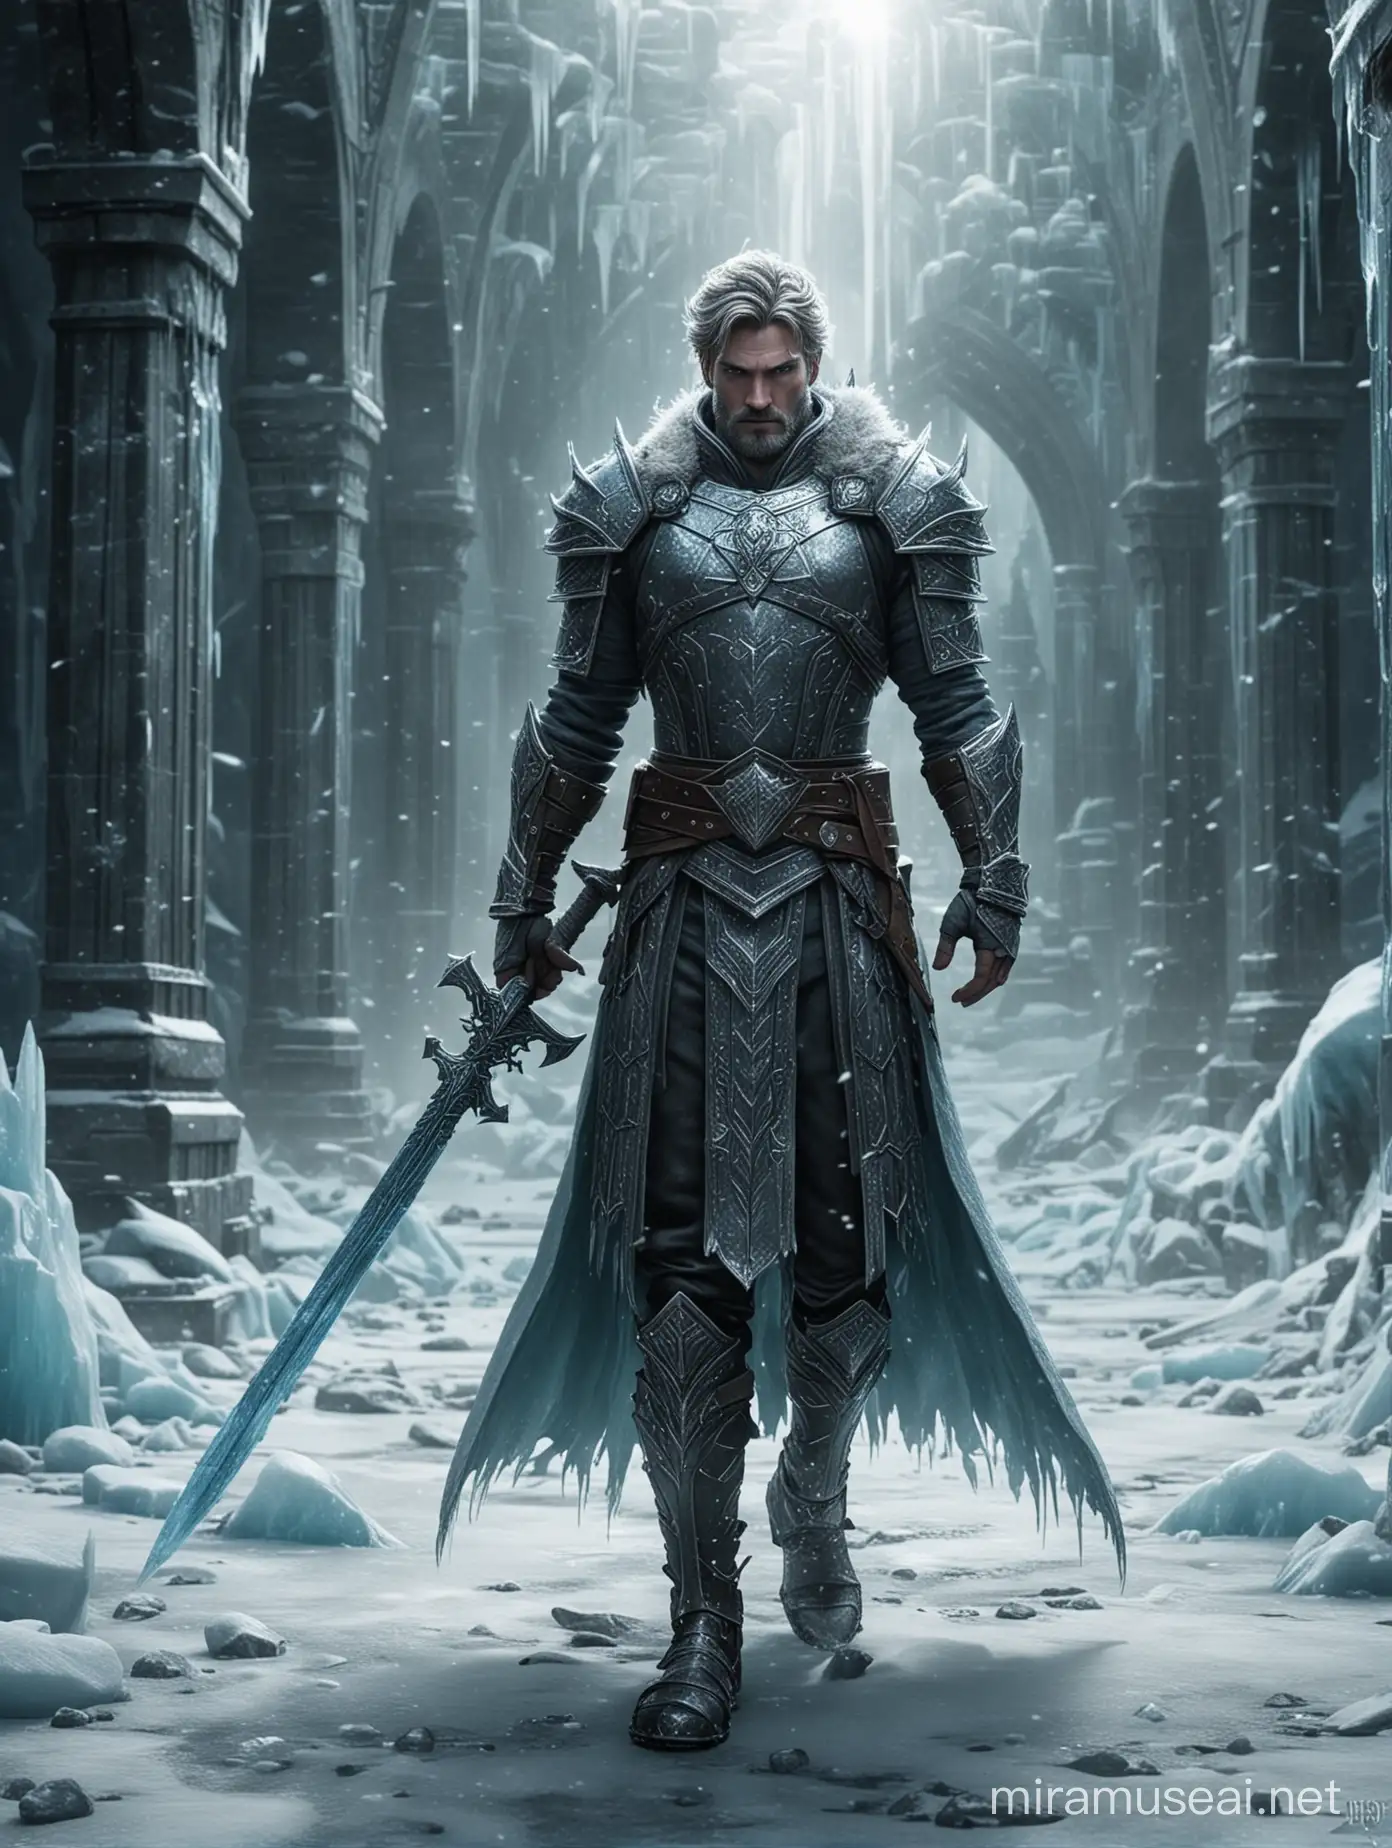 From the heart of a frozen fortress, an ice knight emerges, his armor gleaming like polished diamonds in the frigid light. With a resolute grip, he draws his sword, its blade shimmering with an icy sheen as it reflects the pale glow of the icy citadel. The air around him crackles with frost as he steps forward, a stalwart guardian of the frozen realm, ready to defend his domain against any who would dare to challenge its icy sovereignt, having cinematic looks and detailed hand texture